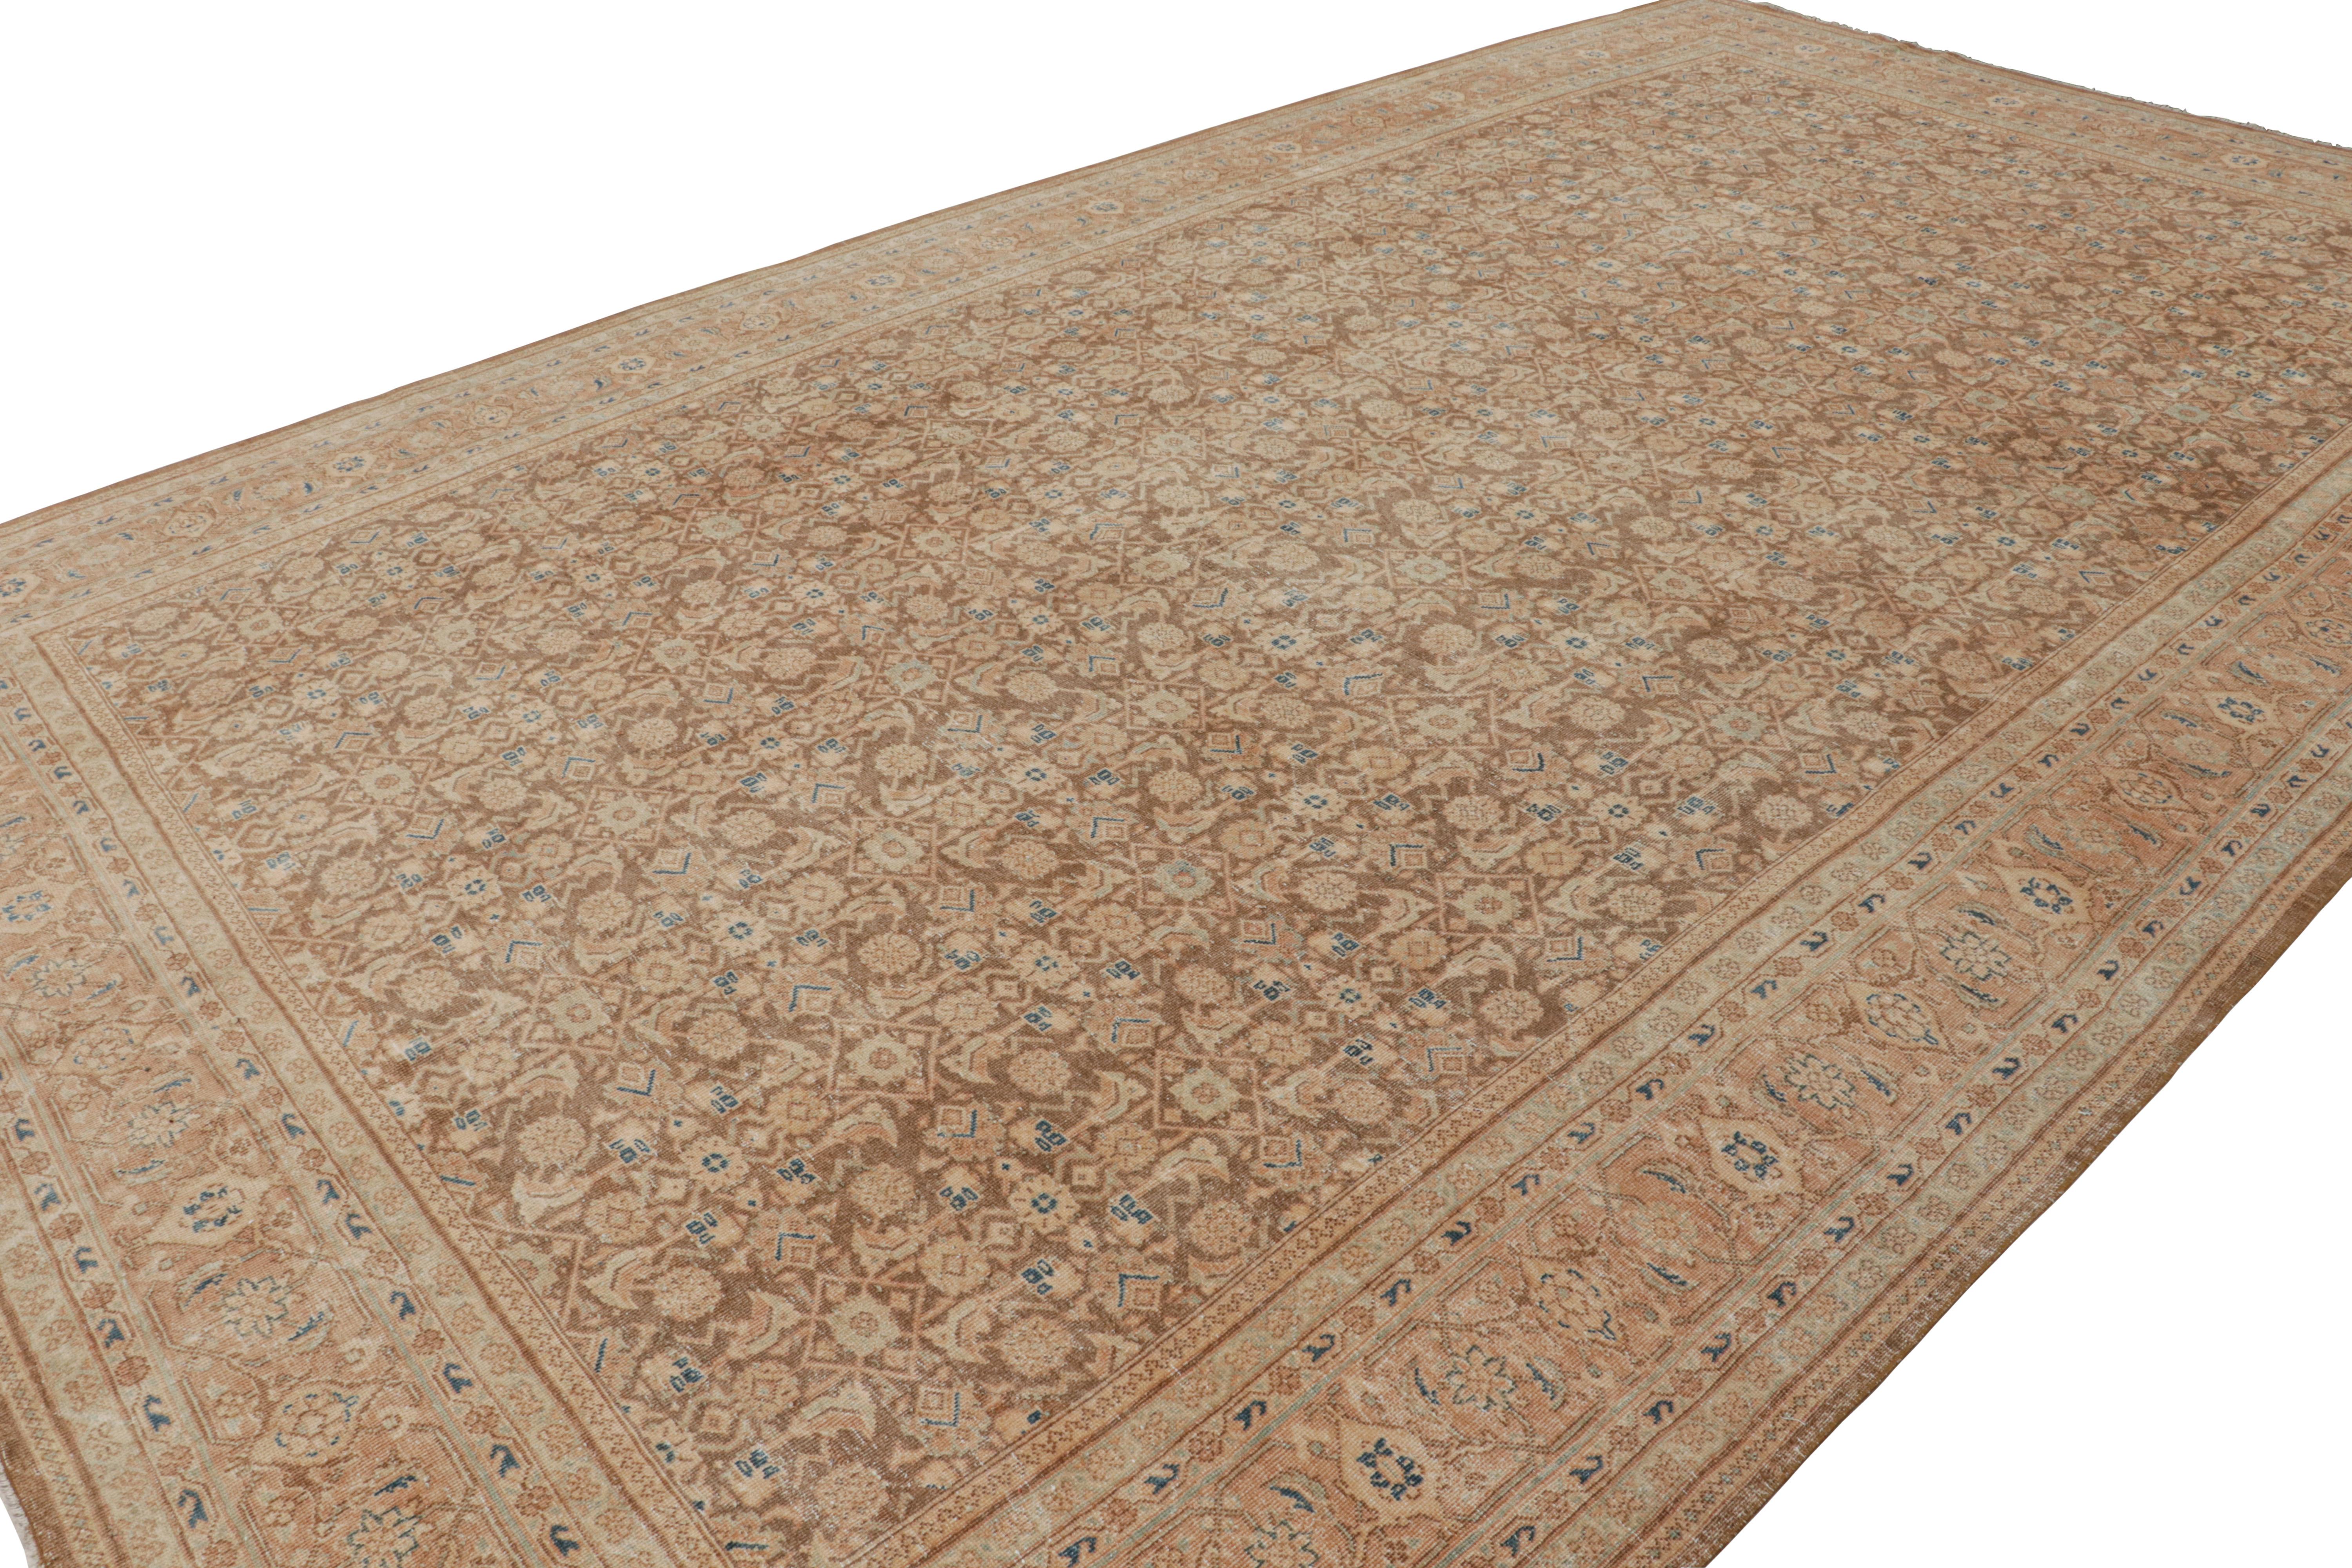 Hand-knotted in luxurious wool, this 10x16 vintage Persian Tabriz rug is a rich example of the Herati pattern. The design features a chocolate brown field with pink and blue and some terracotta tones. 

On the Design: 

Keen eyes for detail will